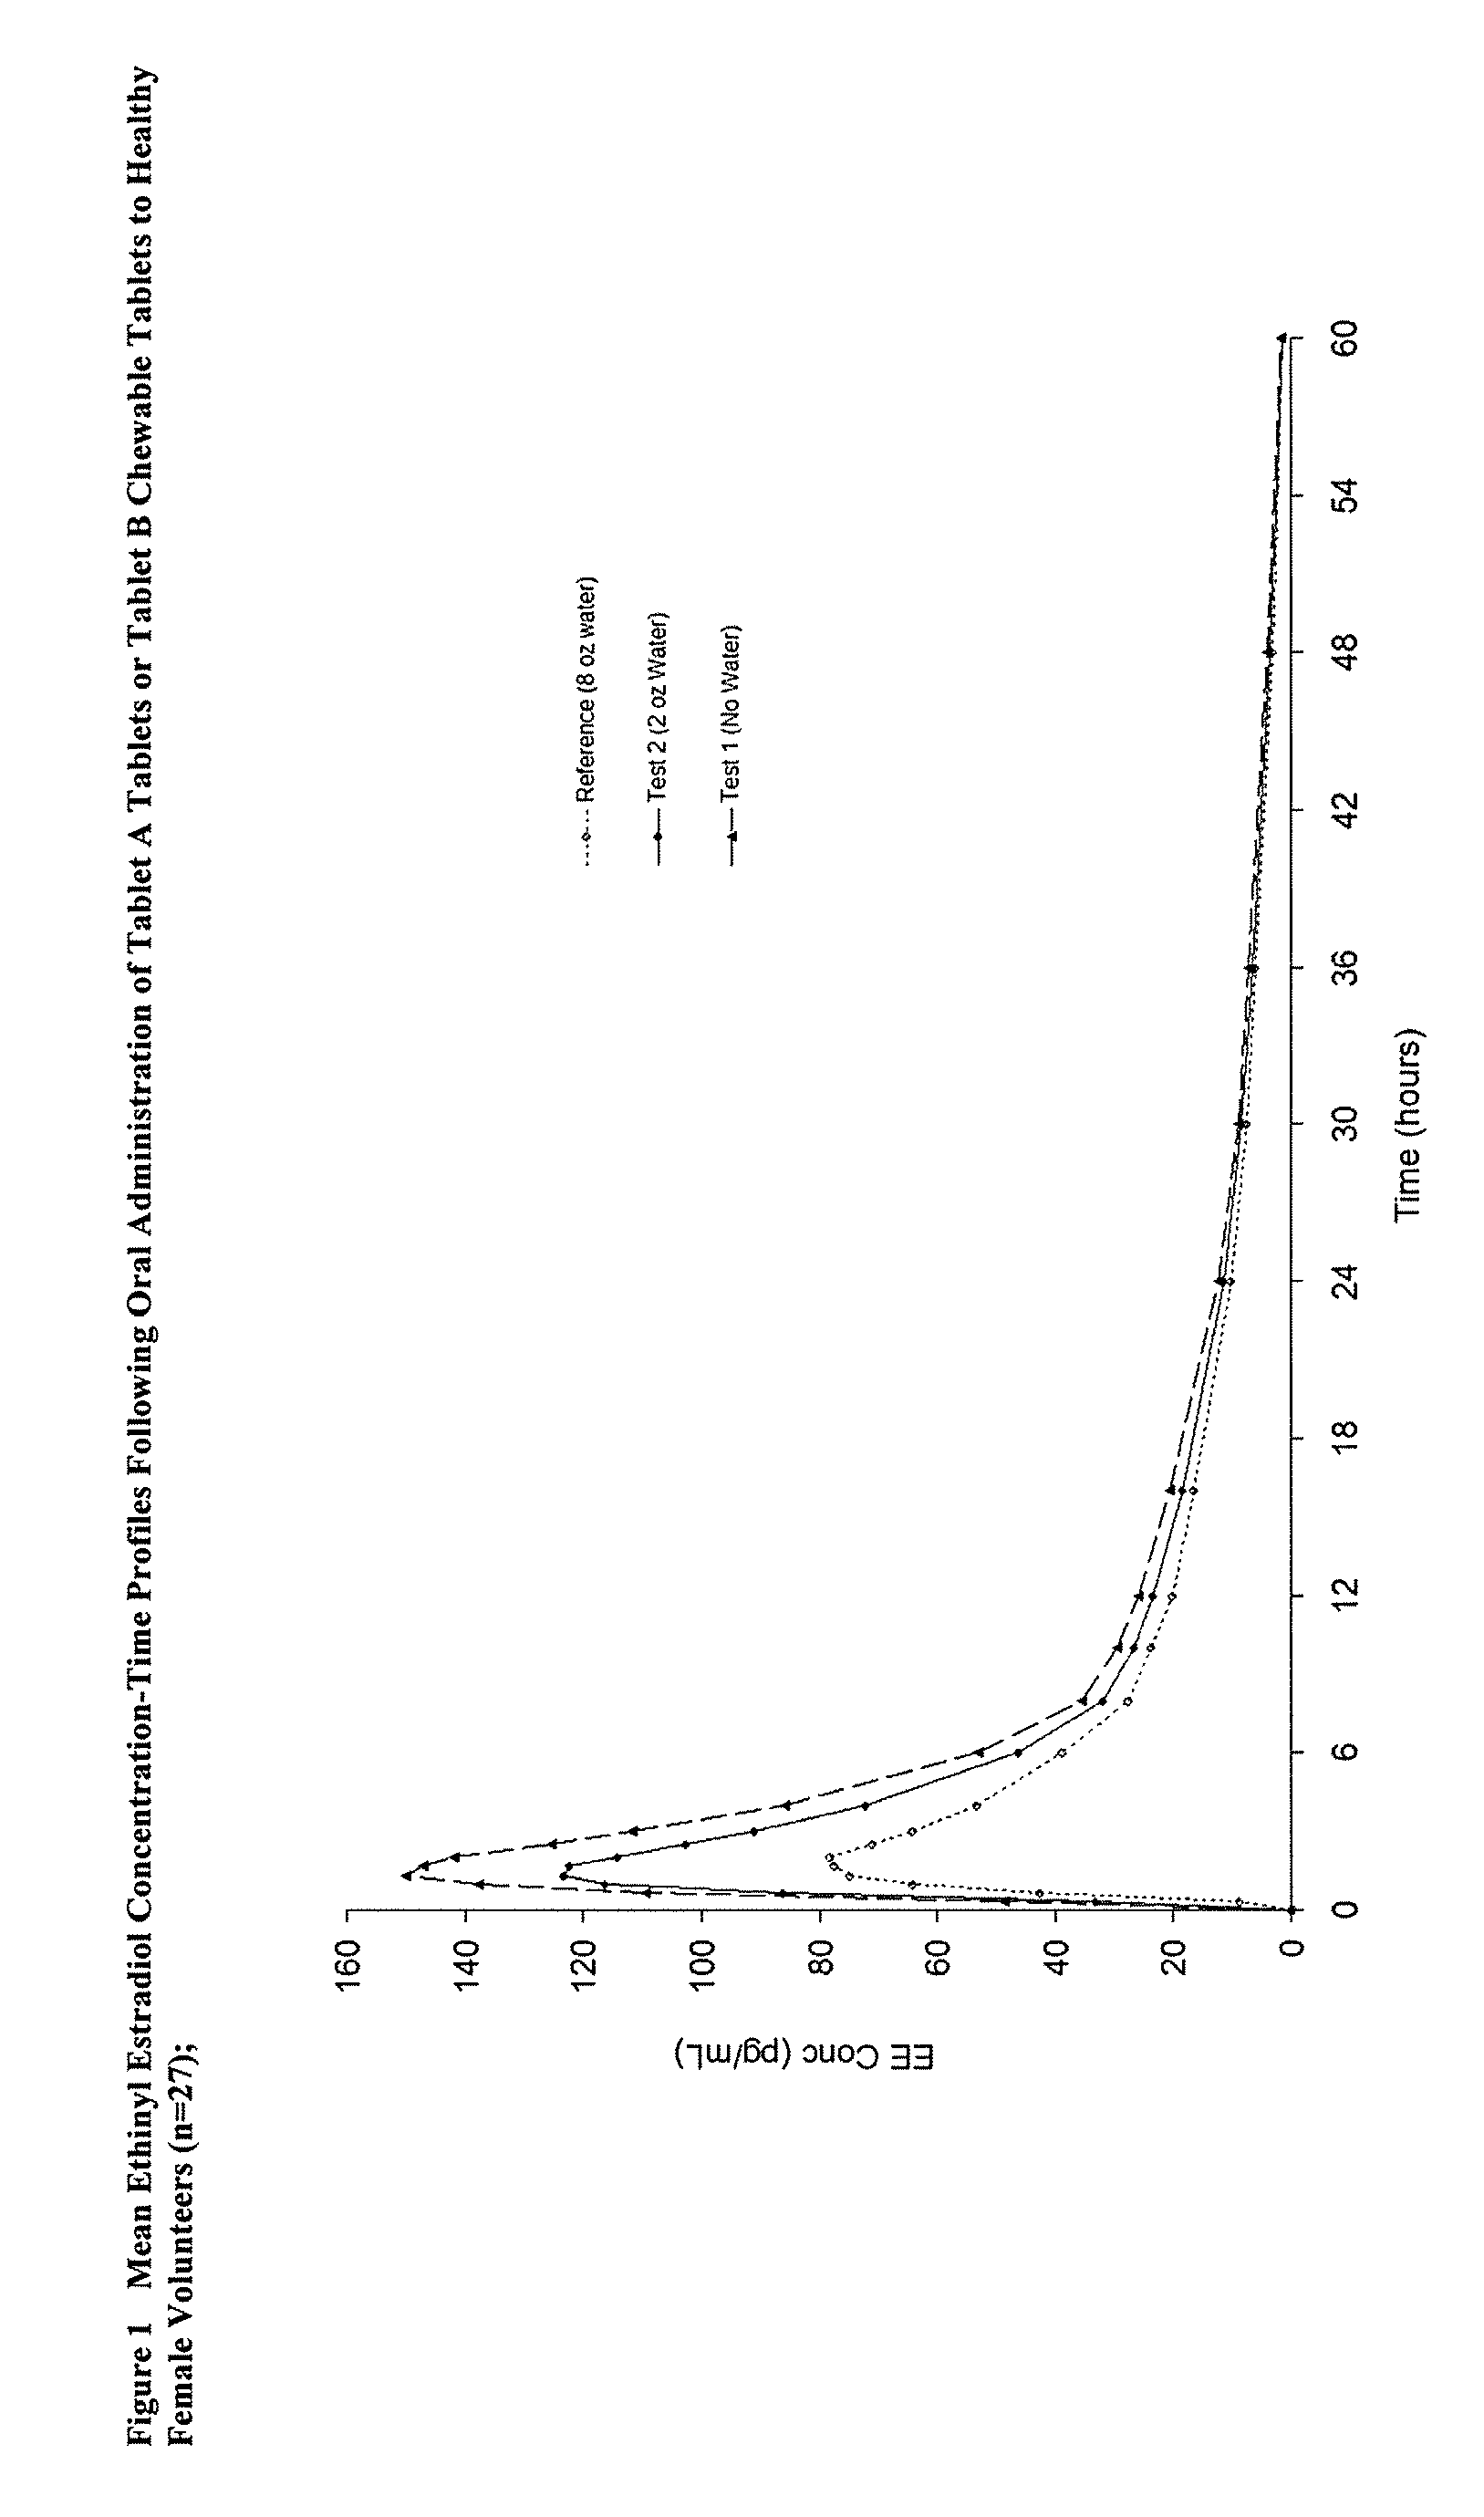 Methods to administer ethinyl estradiol and prodrugs thereof with improved bioavailability